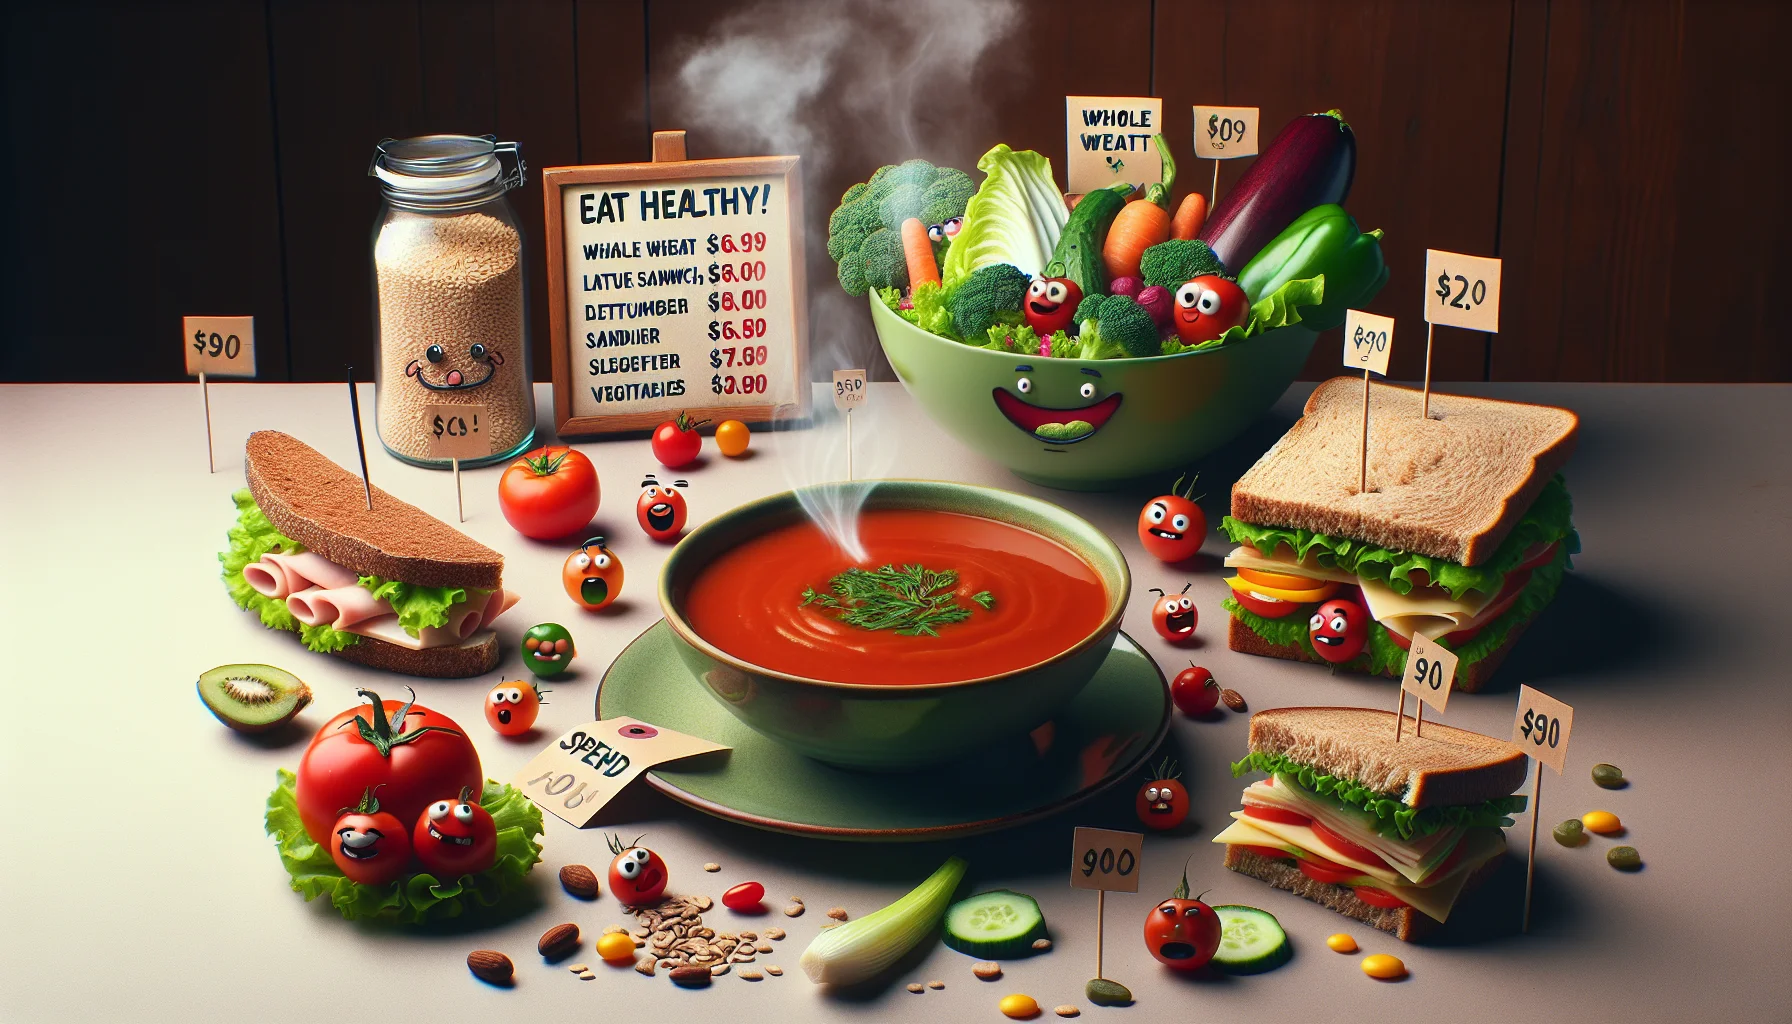 An entertaining scene where a bowl of steaming tomato soup sits on a table. Surrounding the bowl are inexpensive yet healthy food items, such as a whole wheat sandwich, filled with lettuce and turkey, and a vibrant, large salad with diverse vegetables. In a light-hearted twist, the food items have been personified and are pulling funny faces or doing little comical dances. Scattered around are price tags showing very low costs, all under a banner reading, 'Eat Healthy, Spend Less!' The goal of the image is to make viewers laugh and realize that cost-effective, nutritious meals can still be enticing.